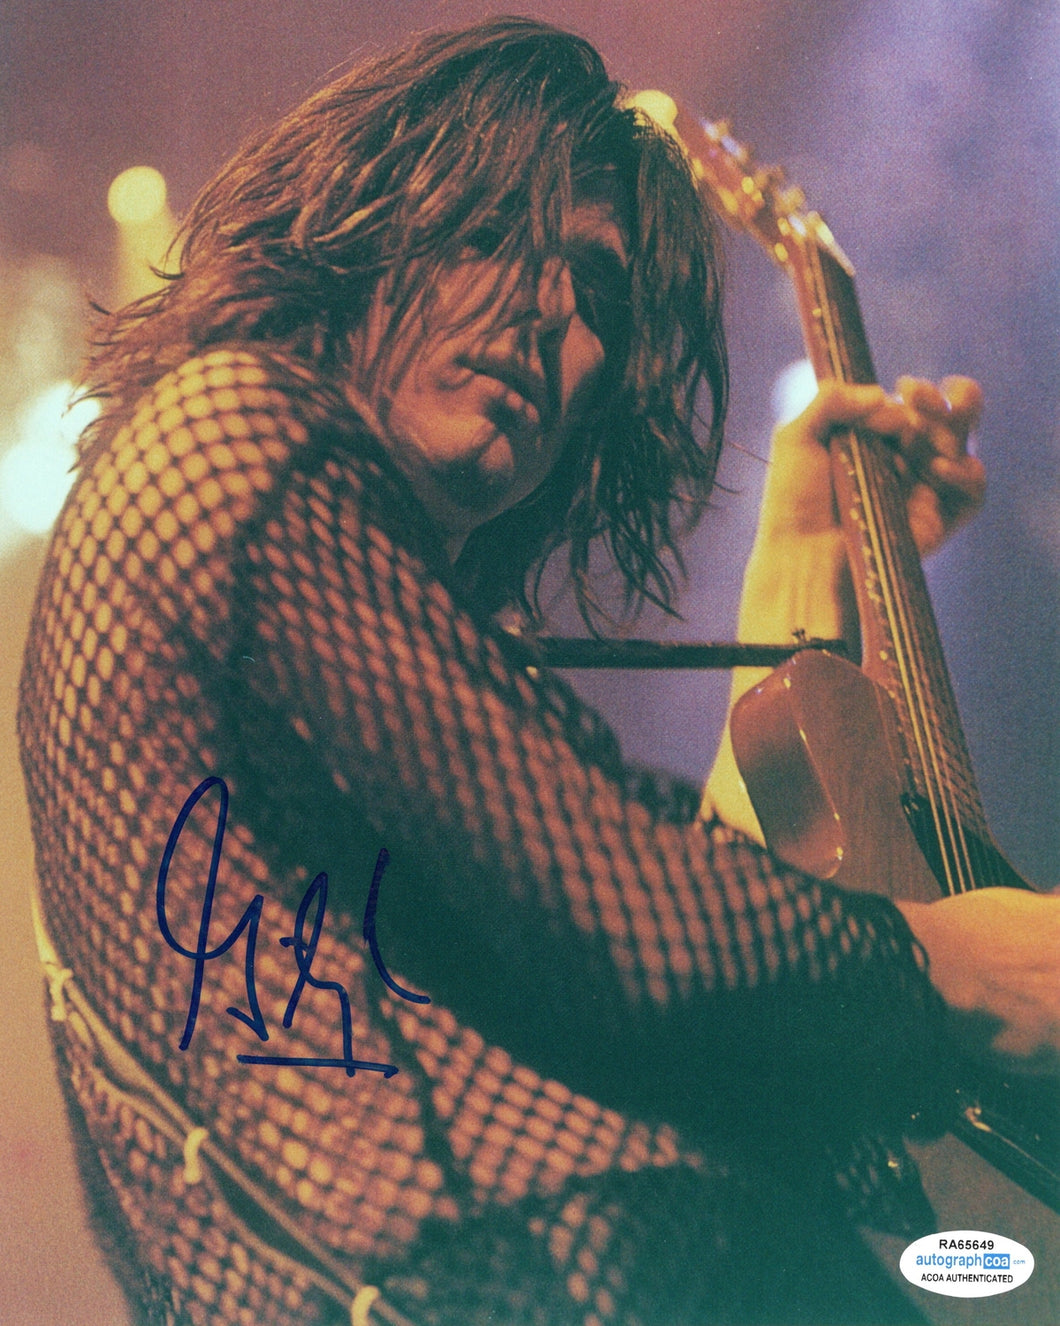 Guns N' Roses Gilby Clarke Autographed Signed 8x10 Photo